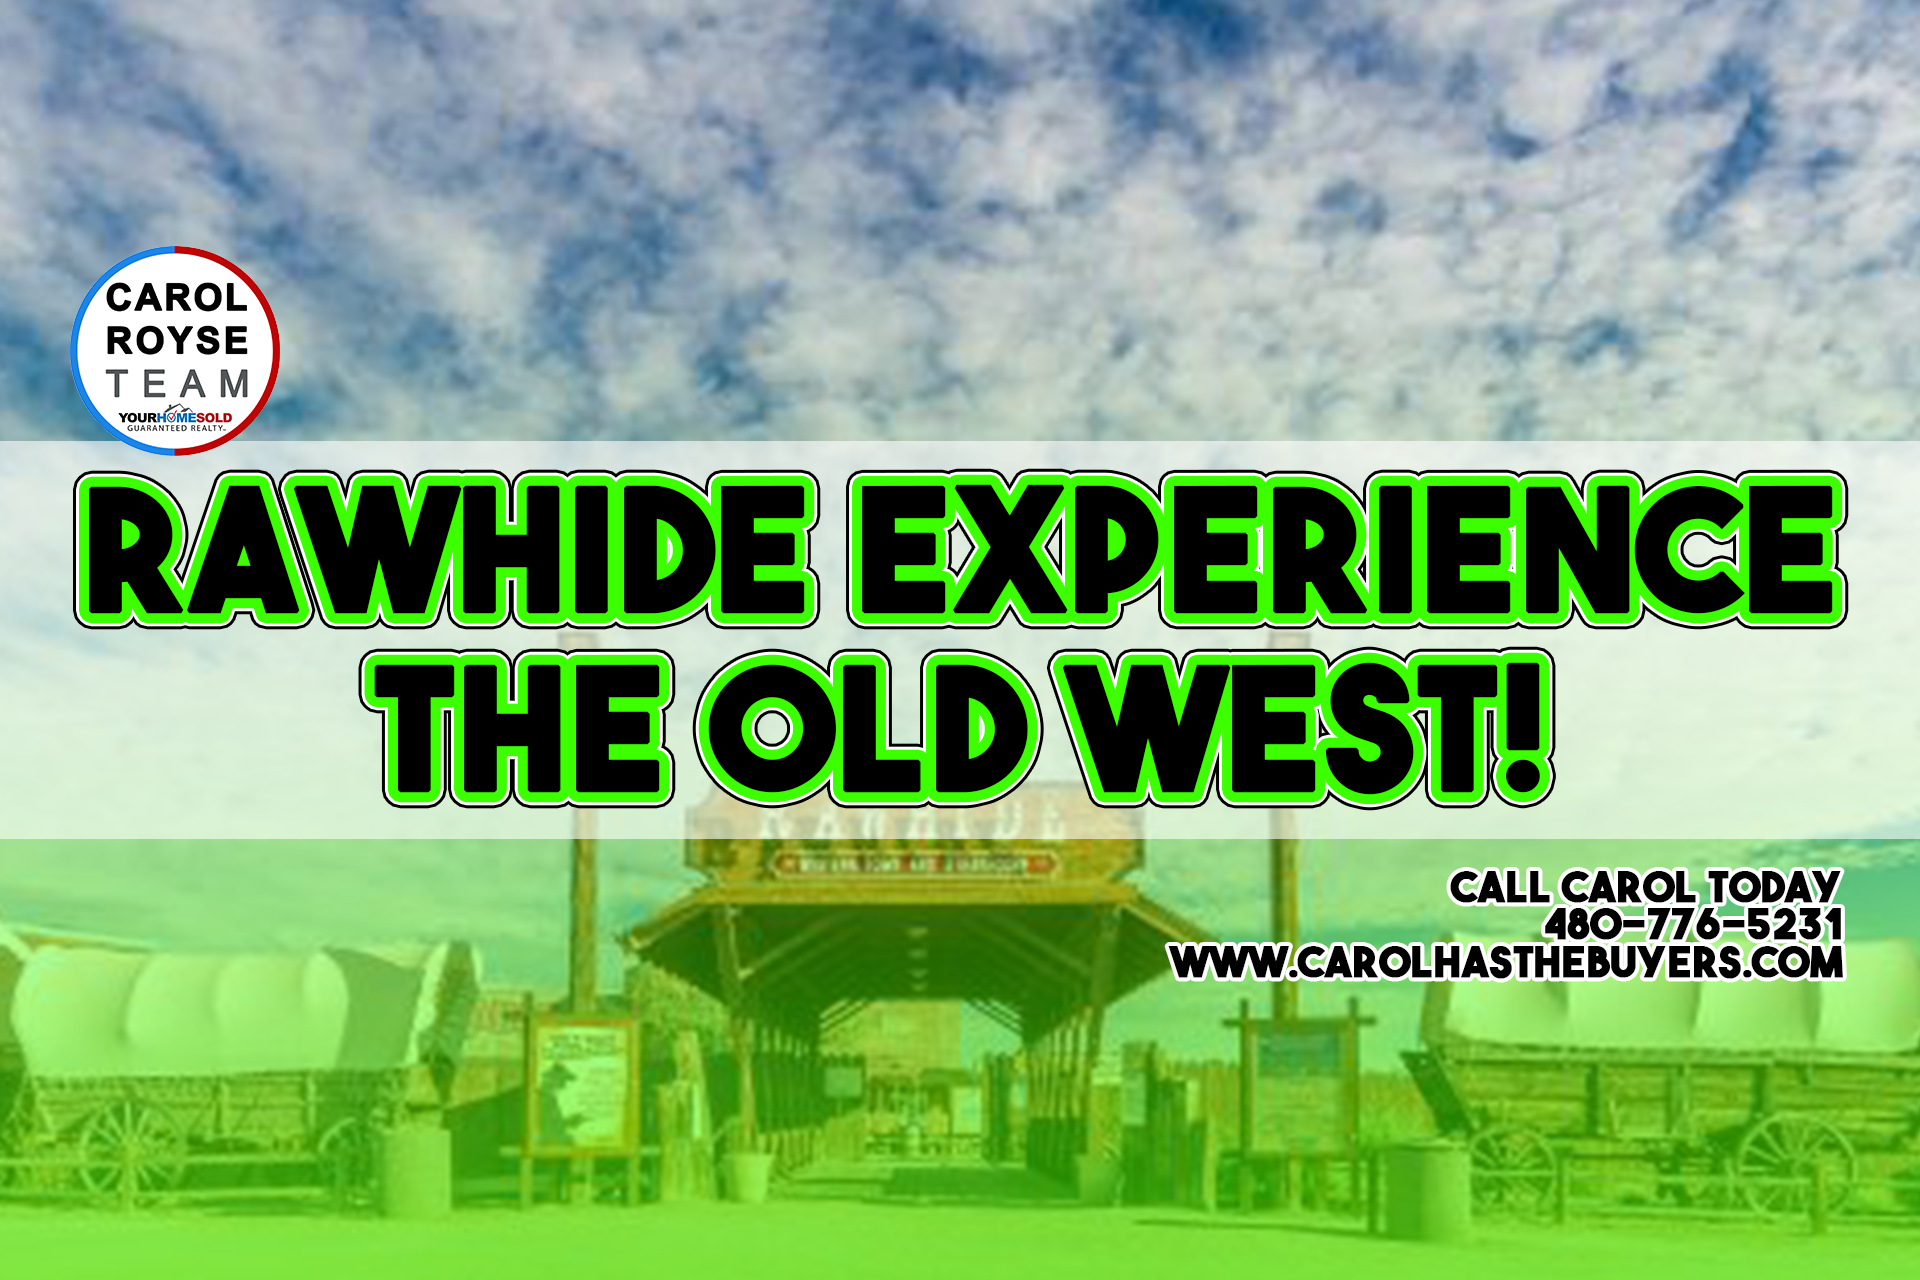 Rawhide Experience the Old West!